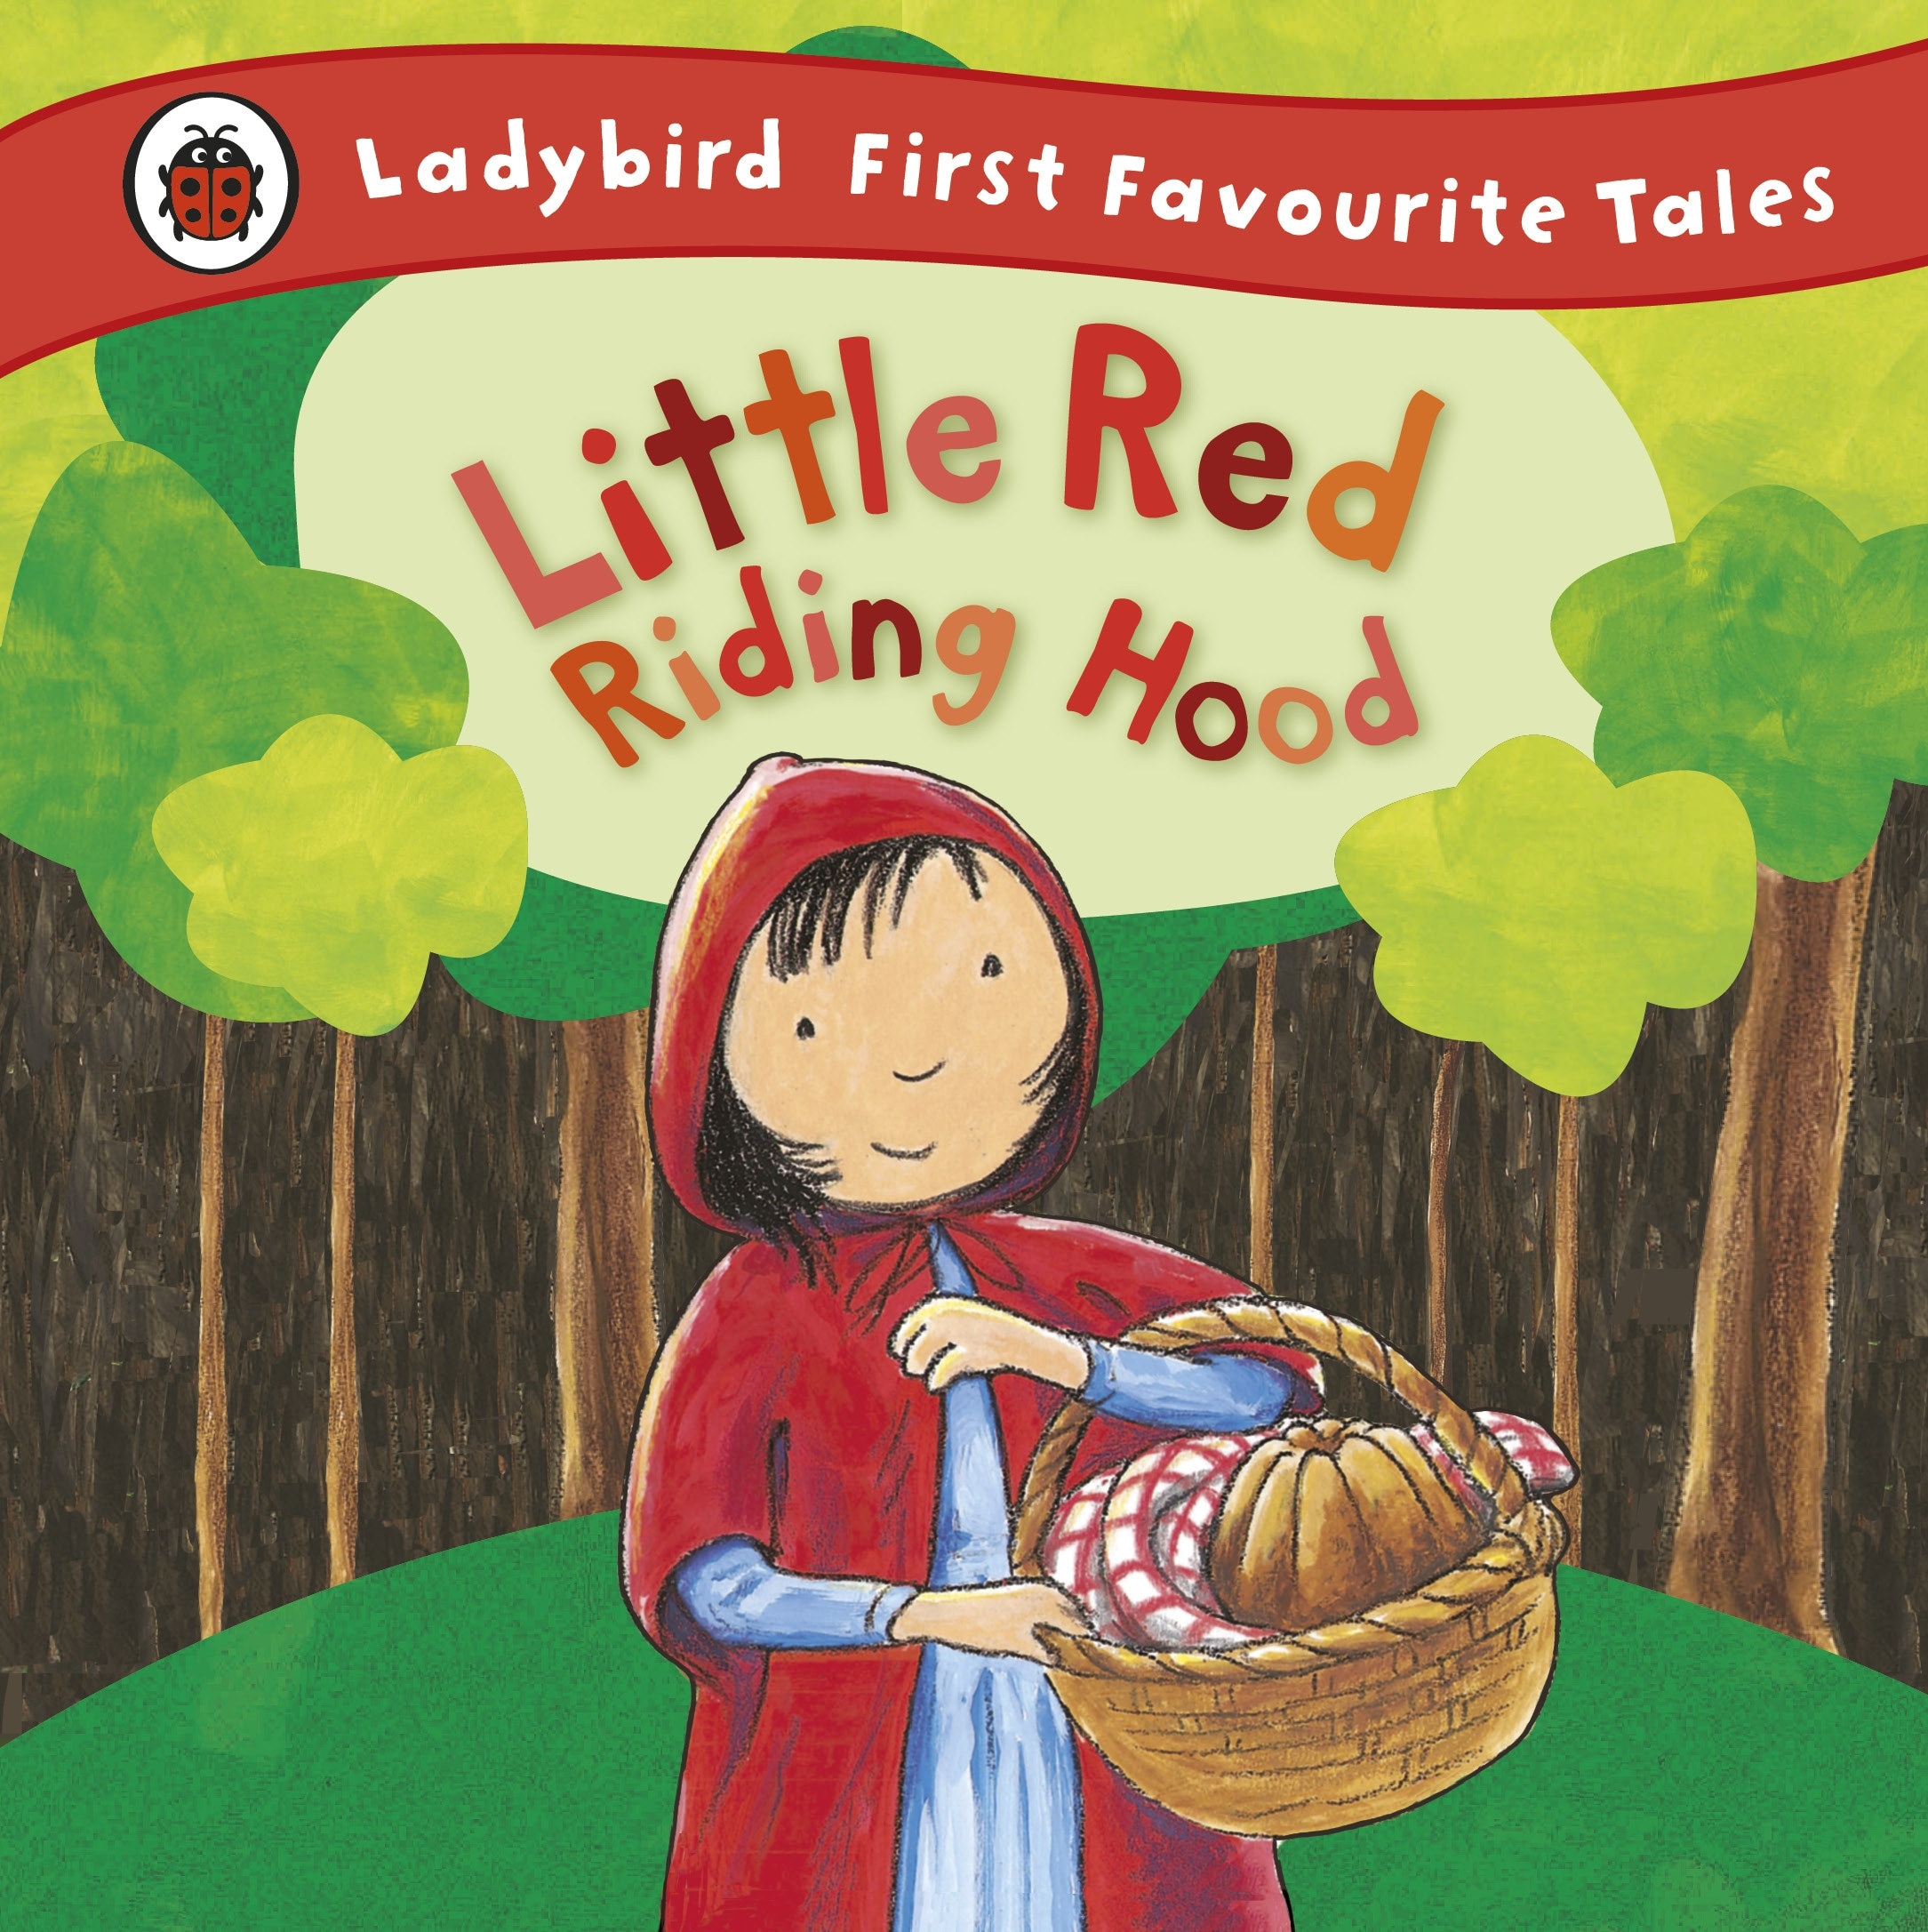 Book “Little Red Riding Hood: Ladybird First Favourite Tales” by Mandy Ross — February 24, 2011